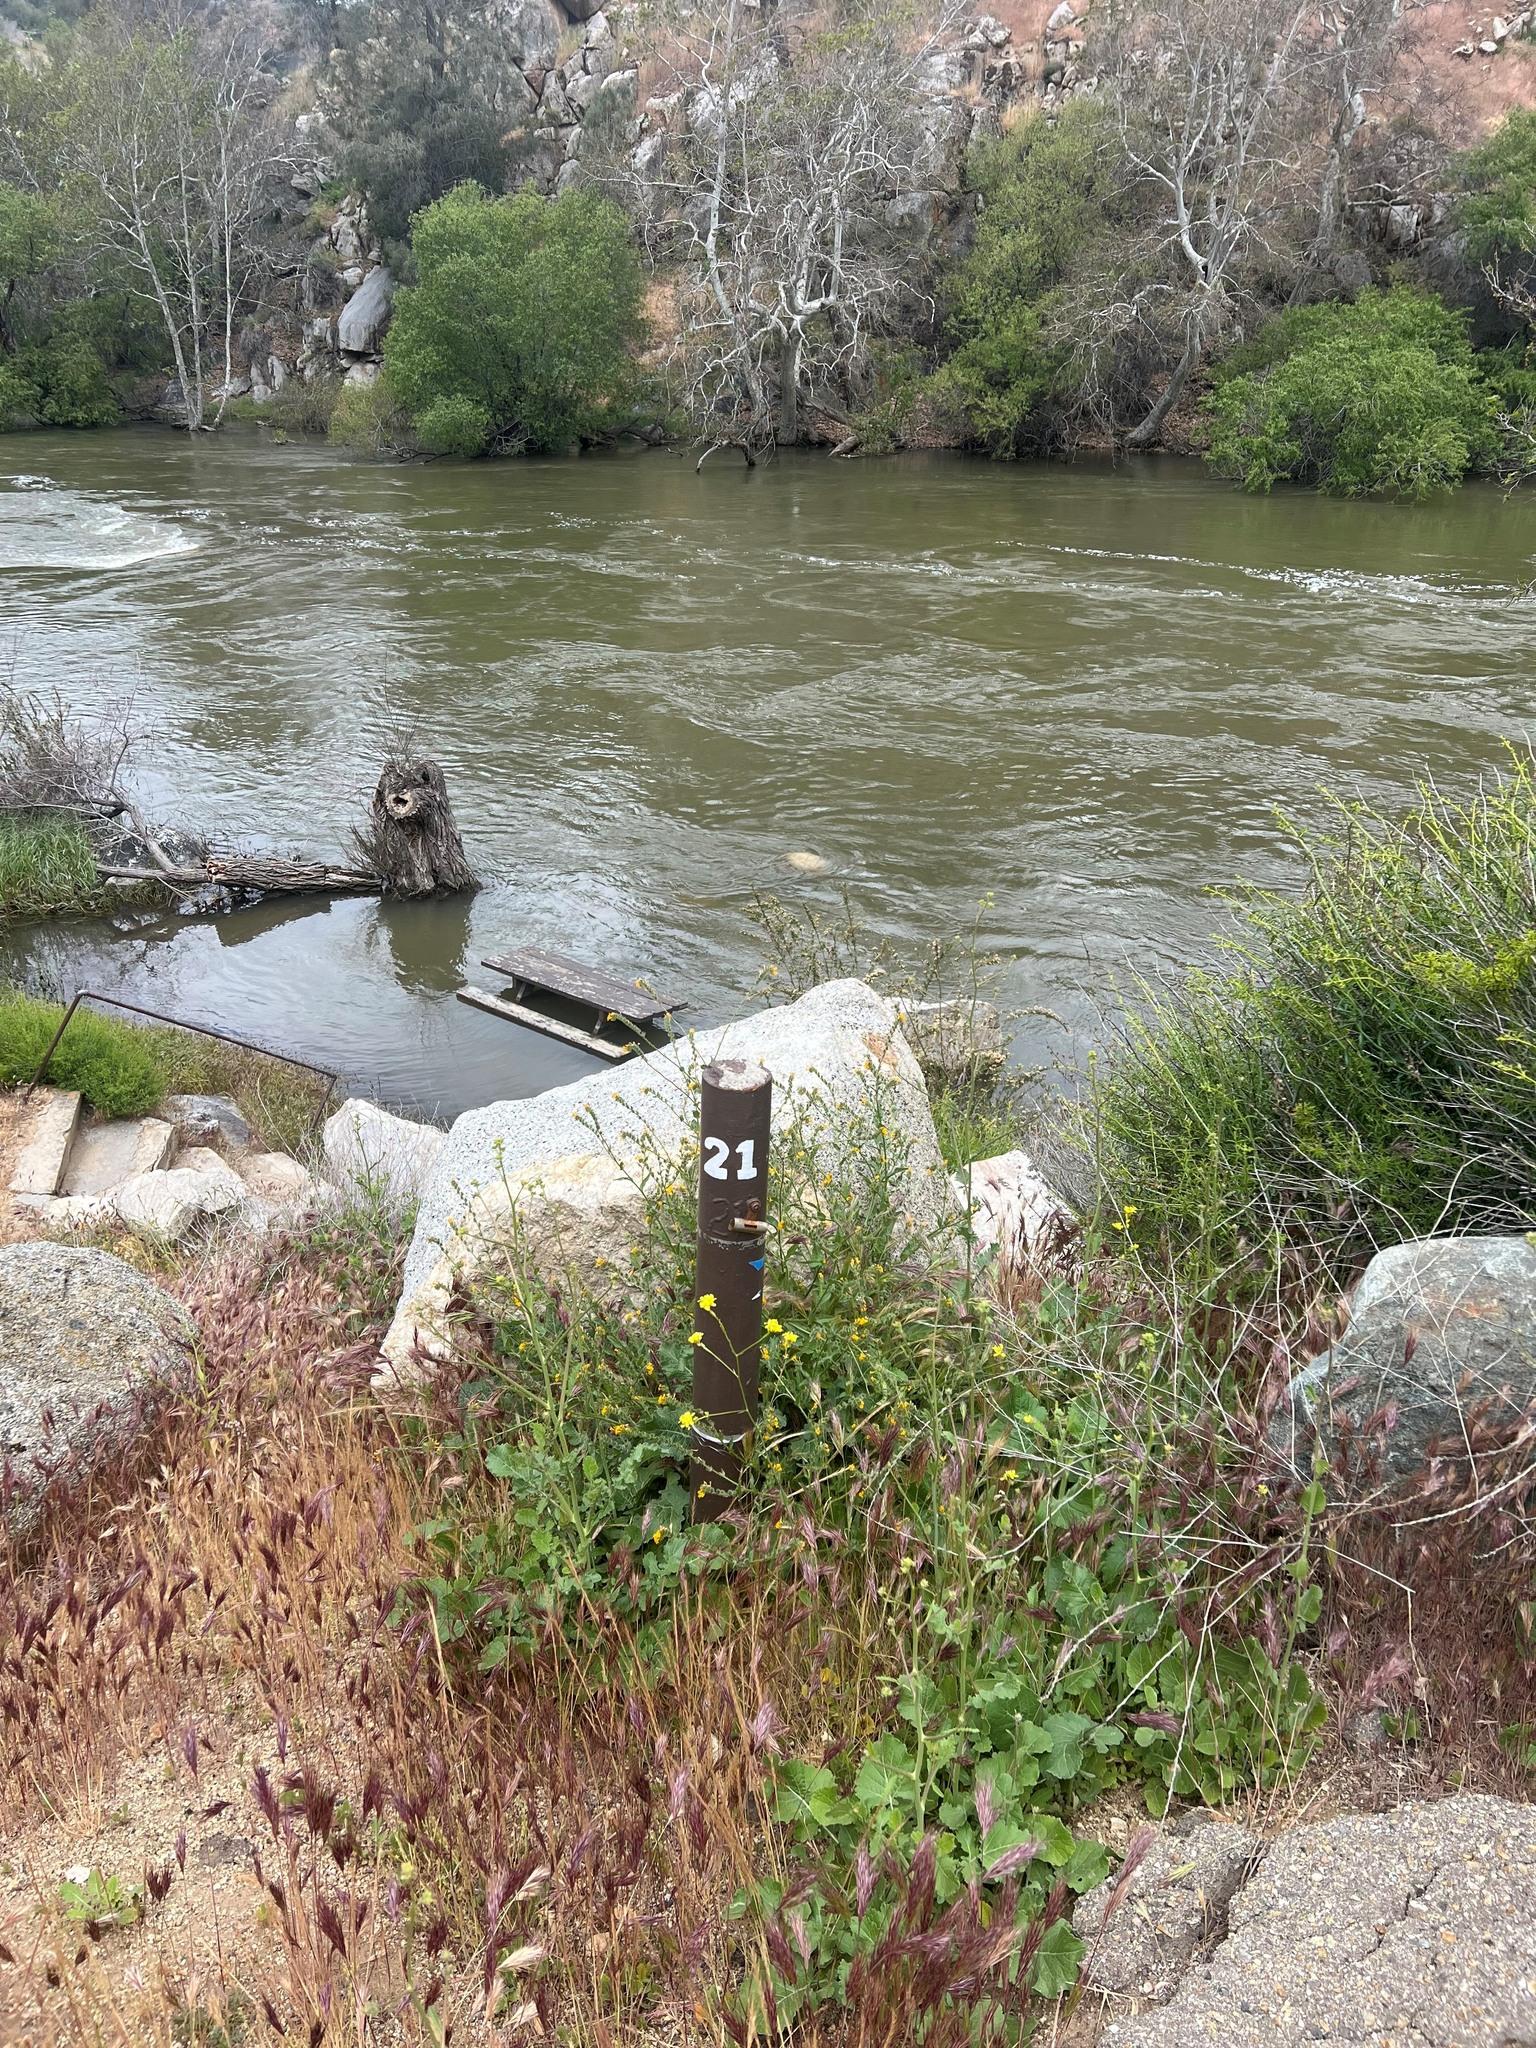 A picnic table in Hobo Campground is nearly submerged under the flooding water of the Kern River.